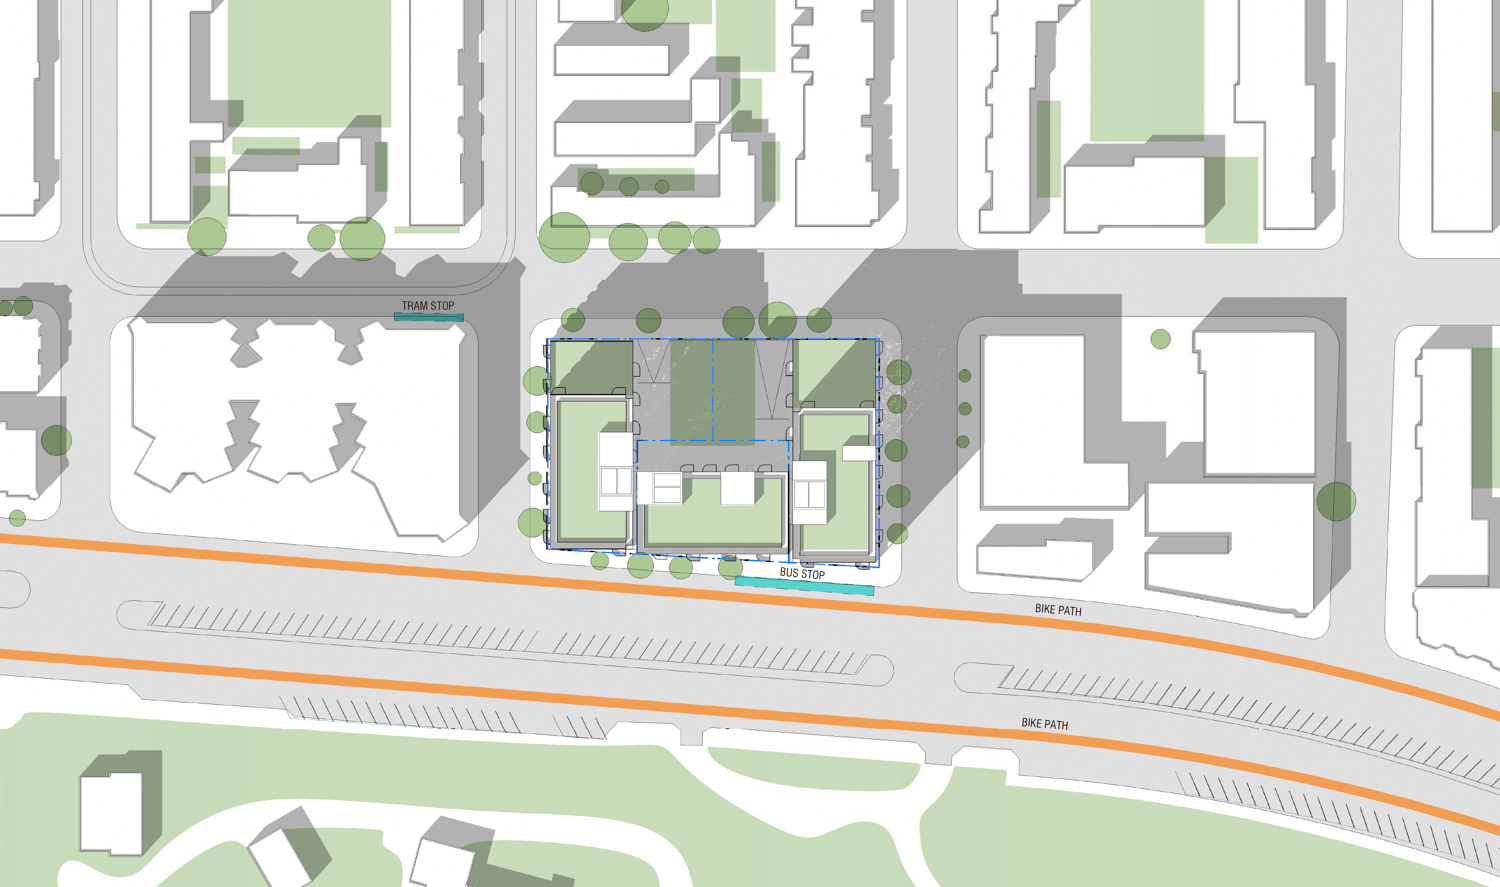 2700 Sloat Street site map, illustration by Lowney Architecture